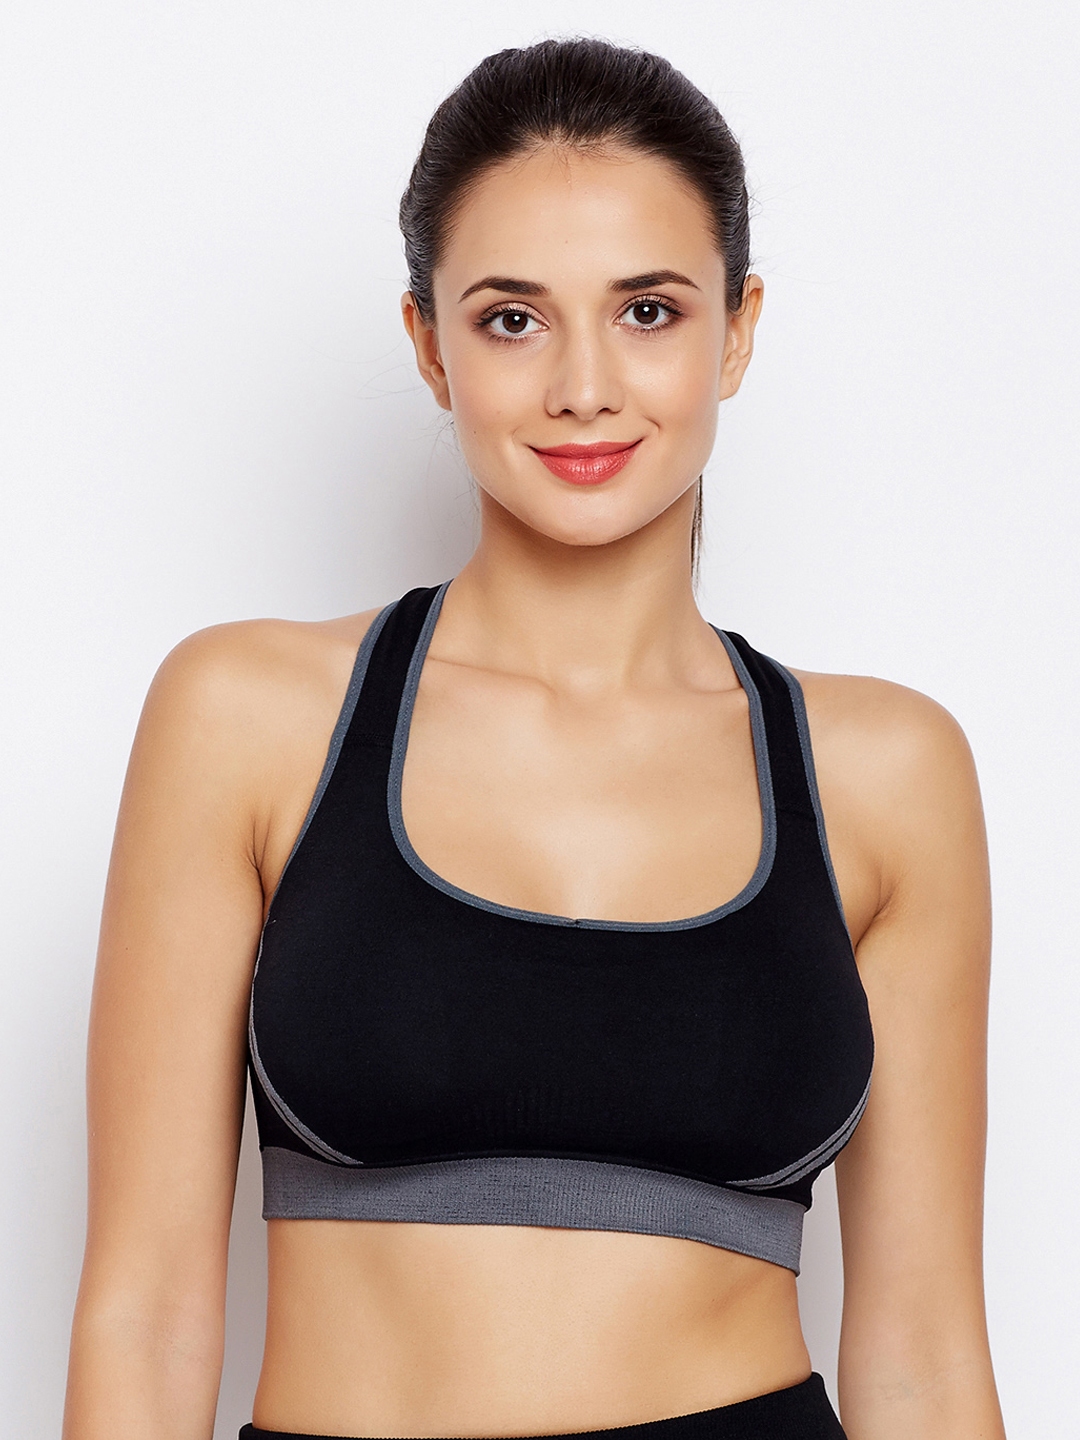 Lebami Black Solid Non-Wired Lightly Padded Sports Bra 3601